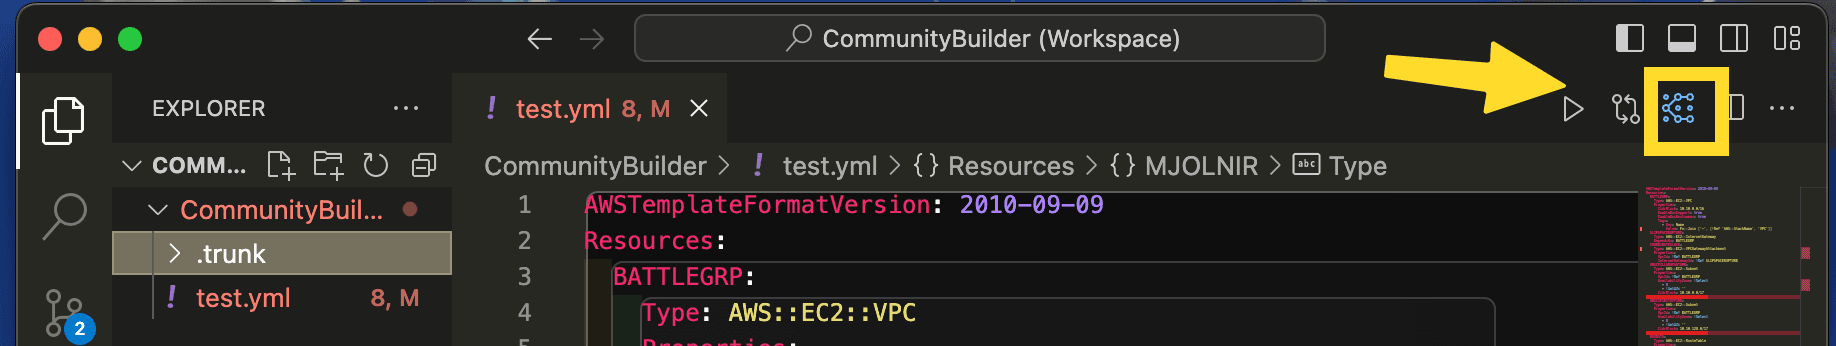 image of vsCode window with icon for tool